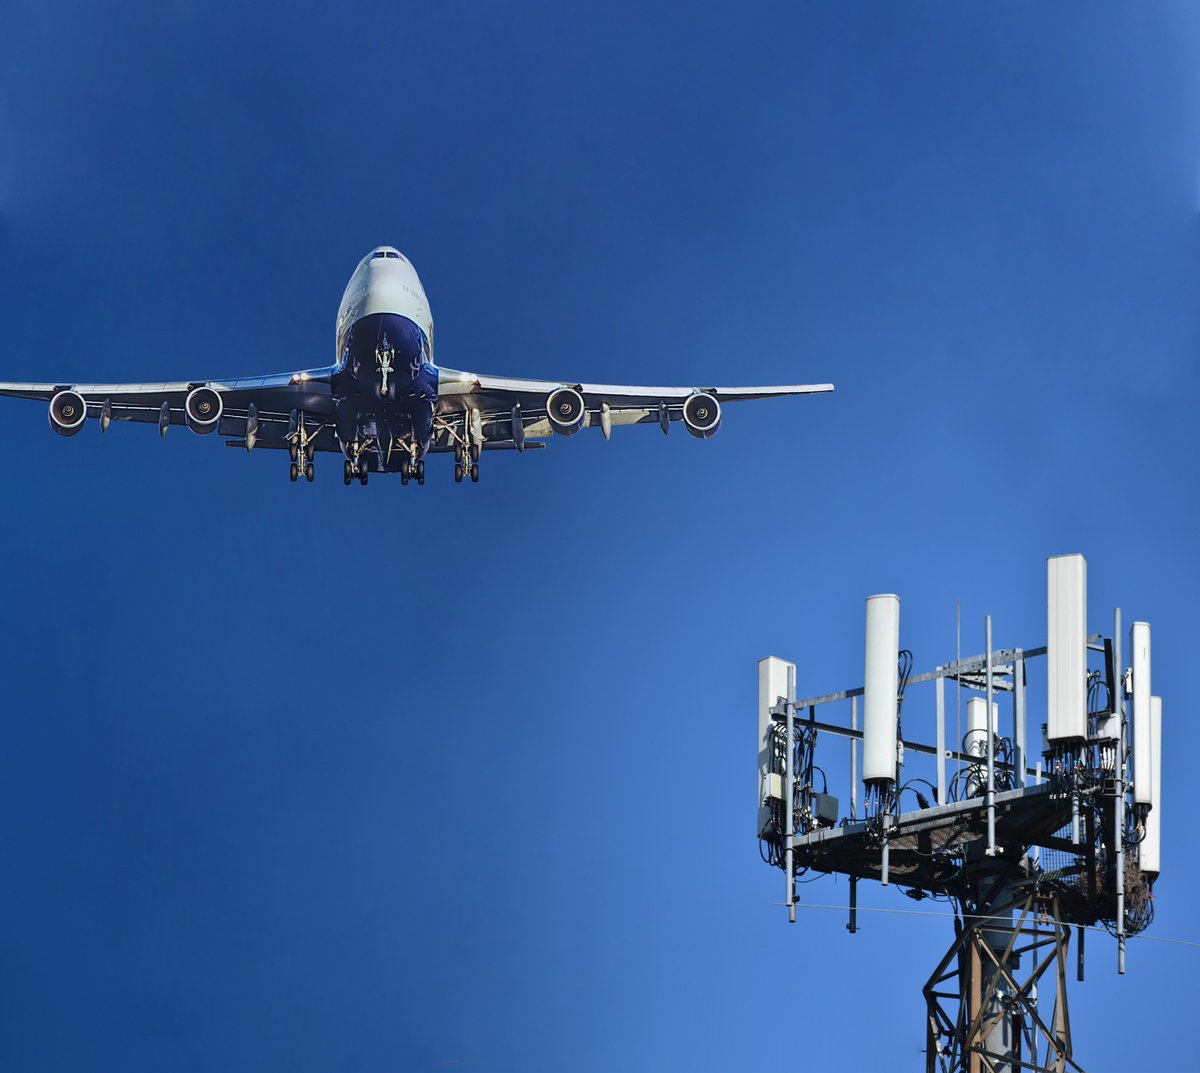 #5G deployment in the #Cband has led to interference concerns within the #avionics community. Read #Anritsu's application note to learn how a sound testing approach is needed to ensure aircraft safety and maximize 5G's benefits: bit.ly/3SFR84A #radar #aircraftsafety